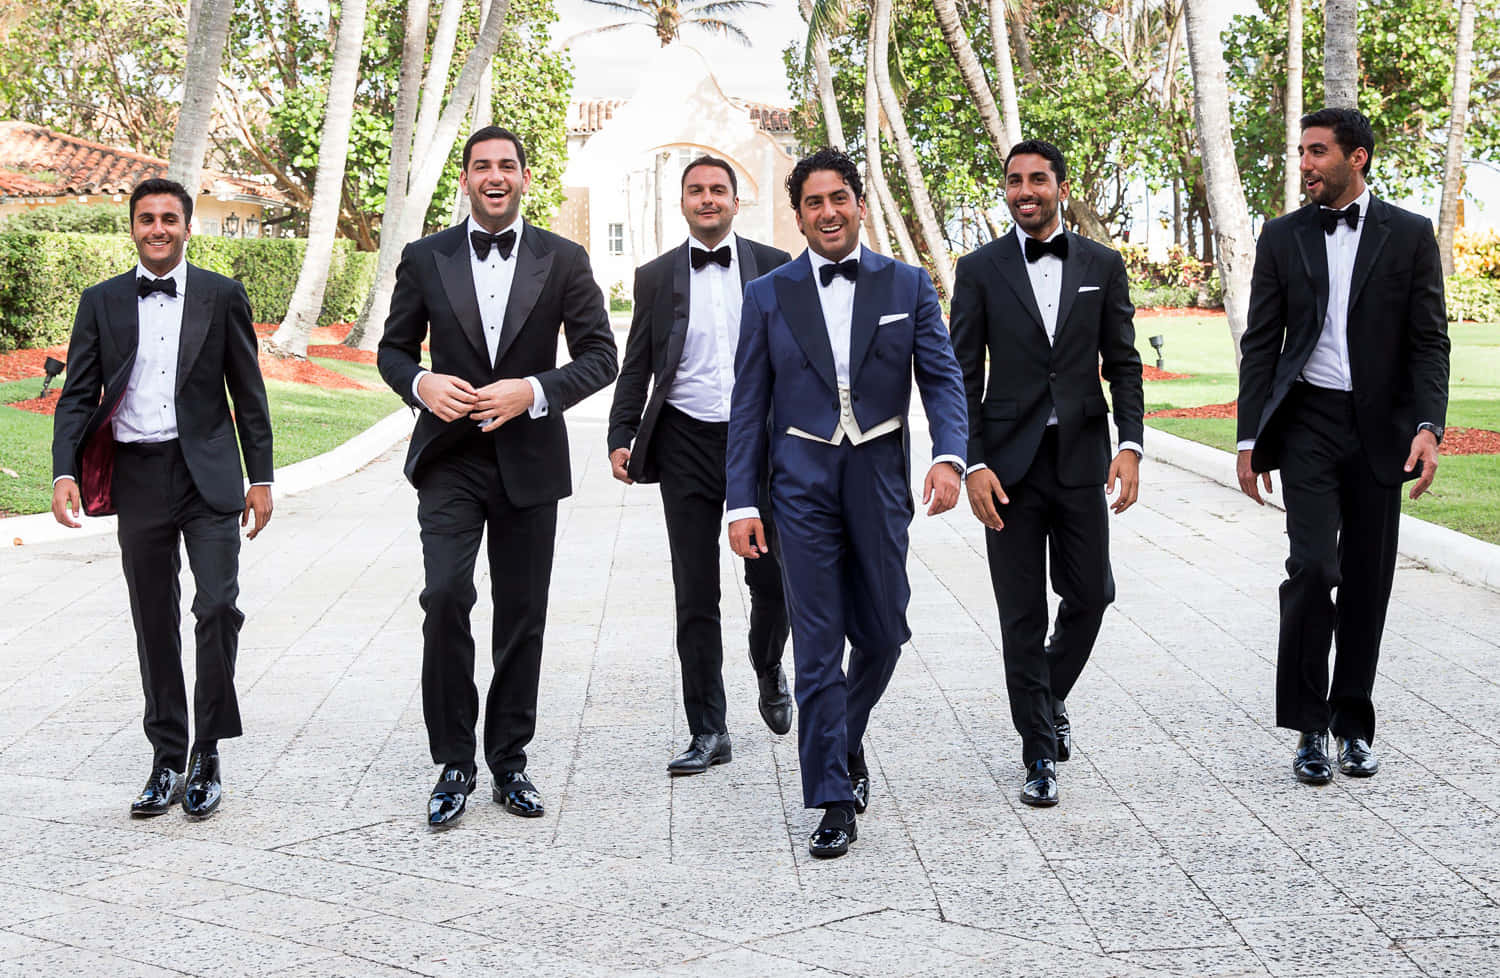 A group of groom and his best-men, ready to celebrate the union of their loved ones.